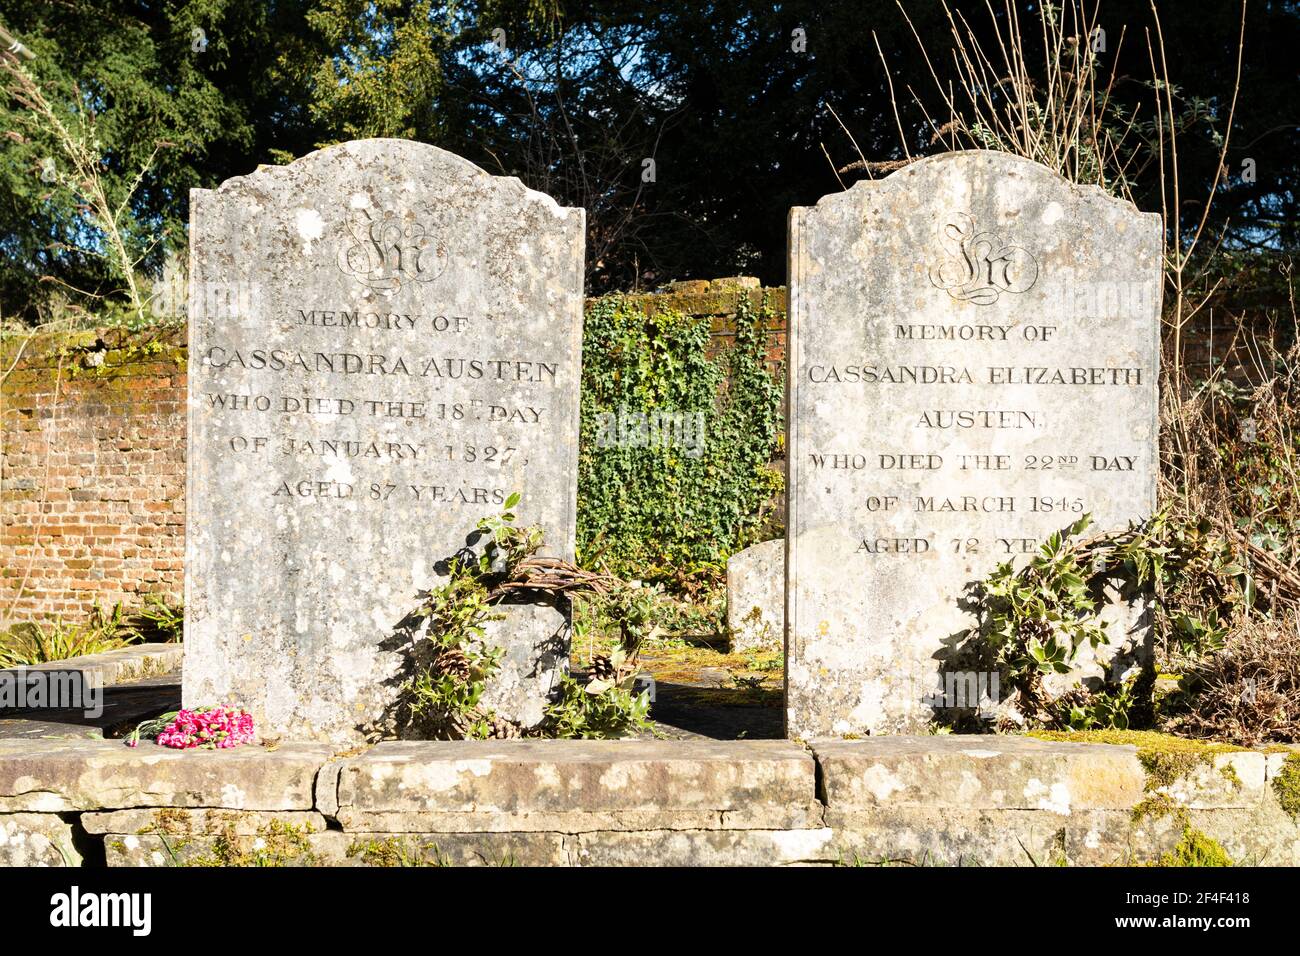 Graves of author Jane Austen's mother and sister in the churchyard of St Nicholas Church in the Hampshire village of Chawton, England, UK. Stock Photo